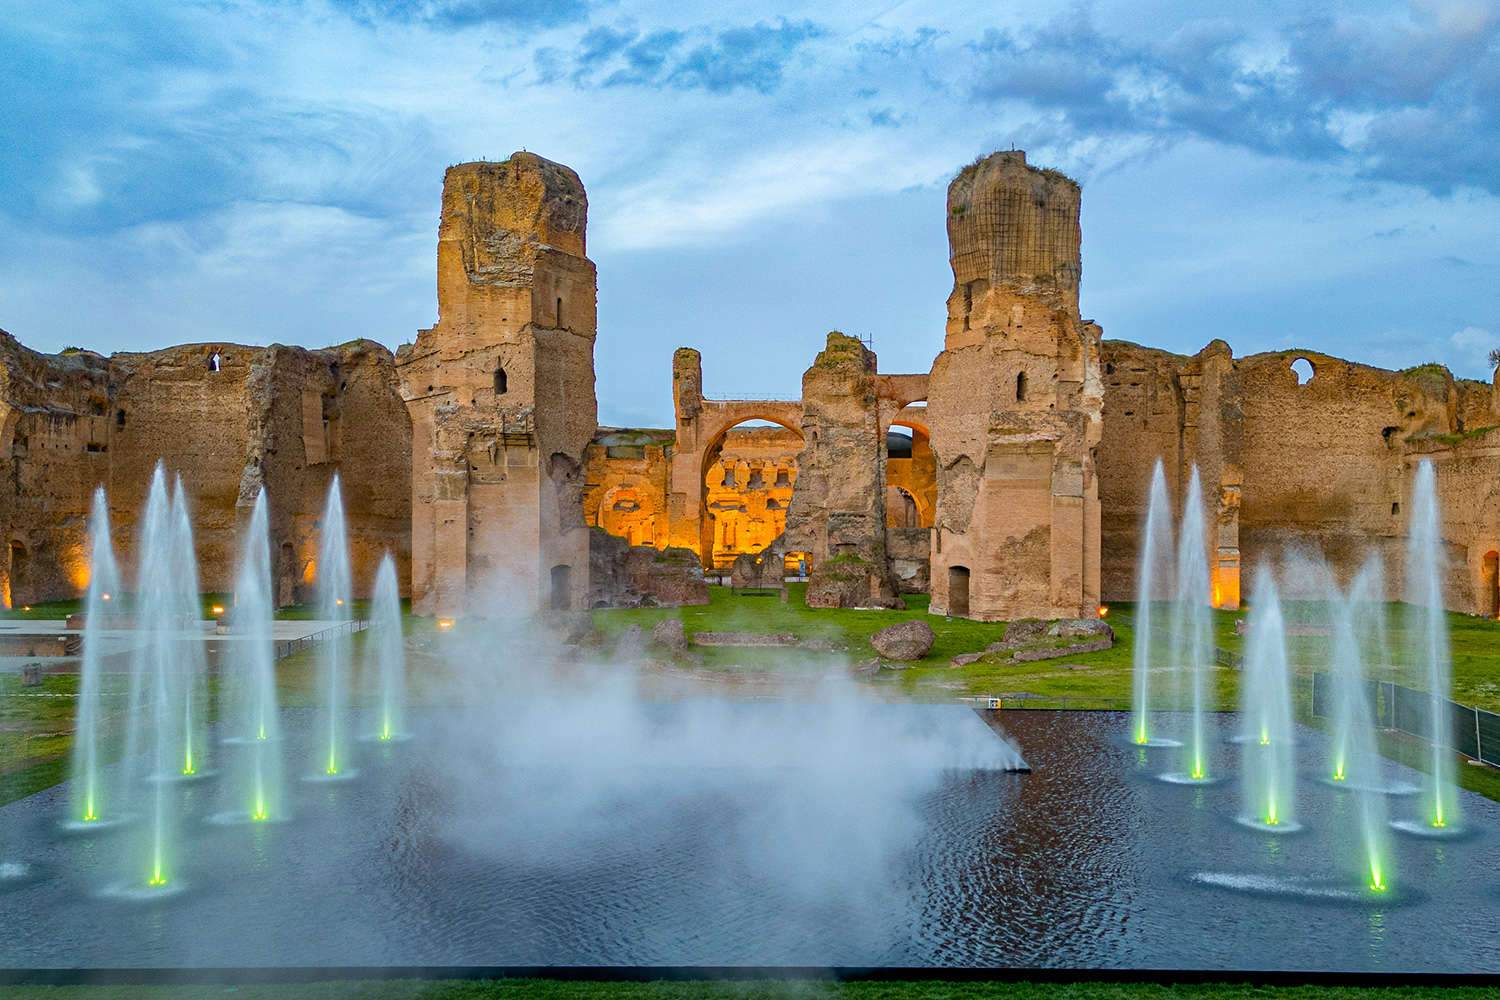 Rome, water returns to the Baths of Caracalla after centuries. Inauguration of Hannes Peer's Mirror.